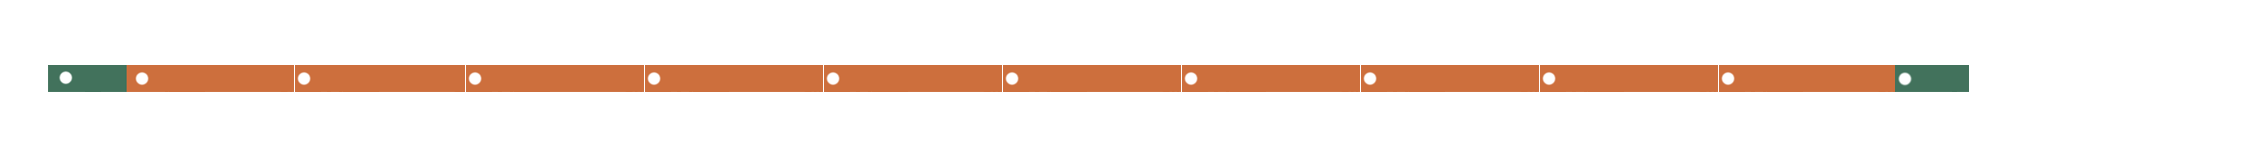 A horizontal line segment. The left- and right-most tips are colored in green, and the majority of the line segment, on the inside, is orange. 10 dots are evenly interspersed among the orange portion of the segment.